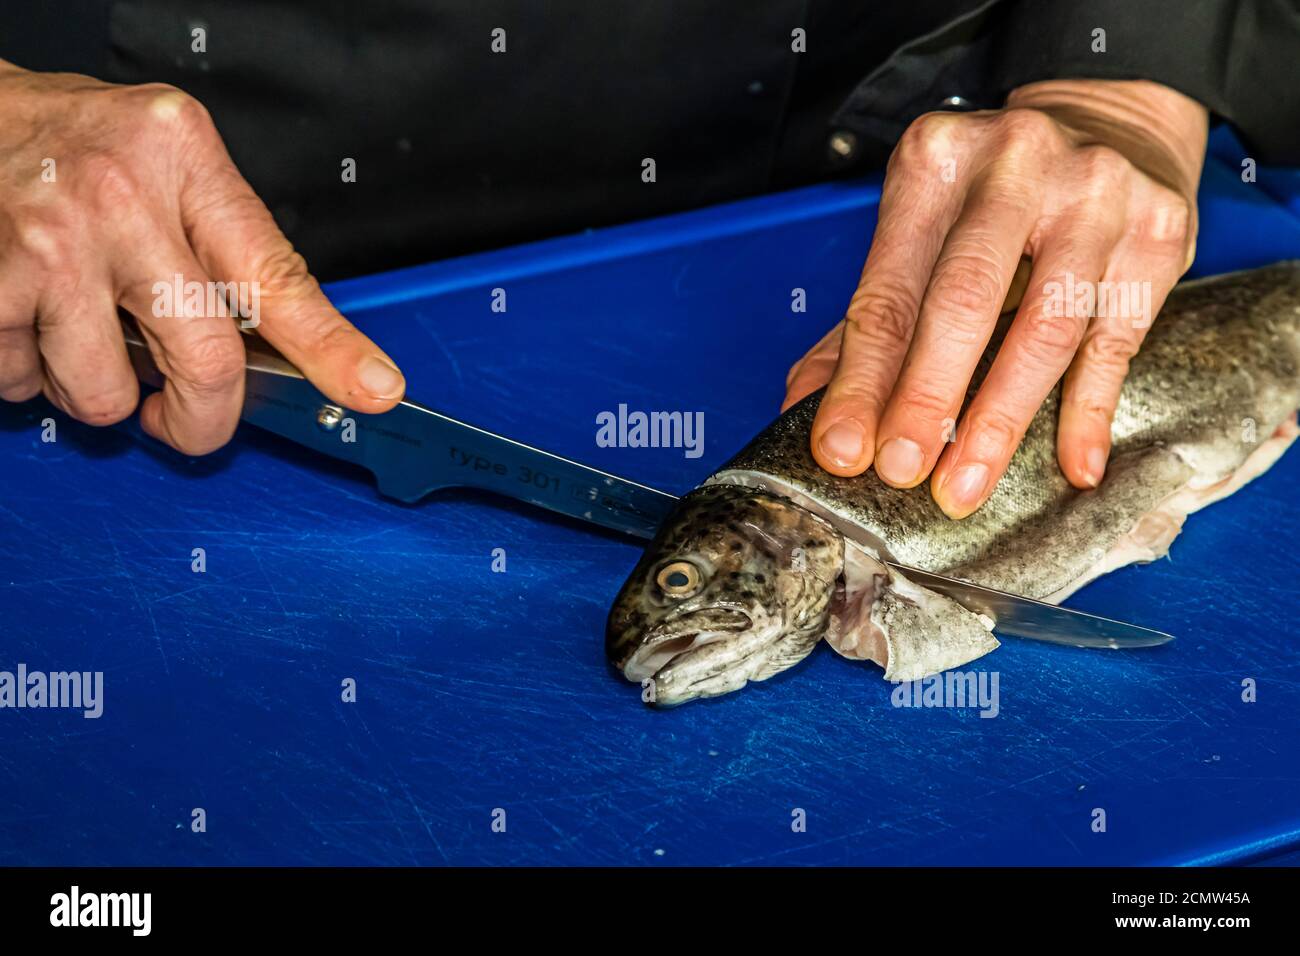 How do you fillet a trout? After removing the fins, the trout's head is cut off Stock Photo